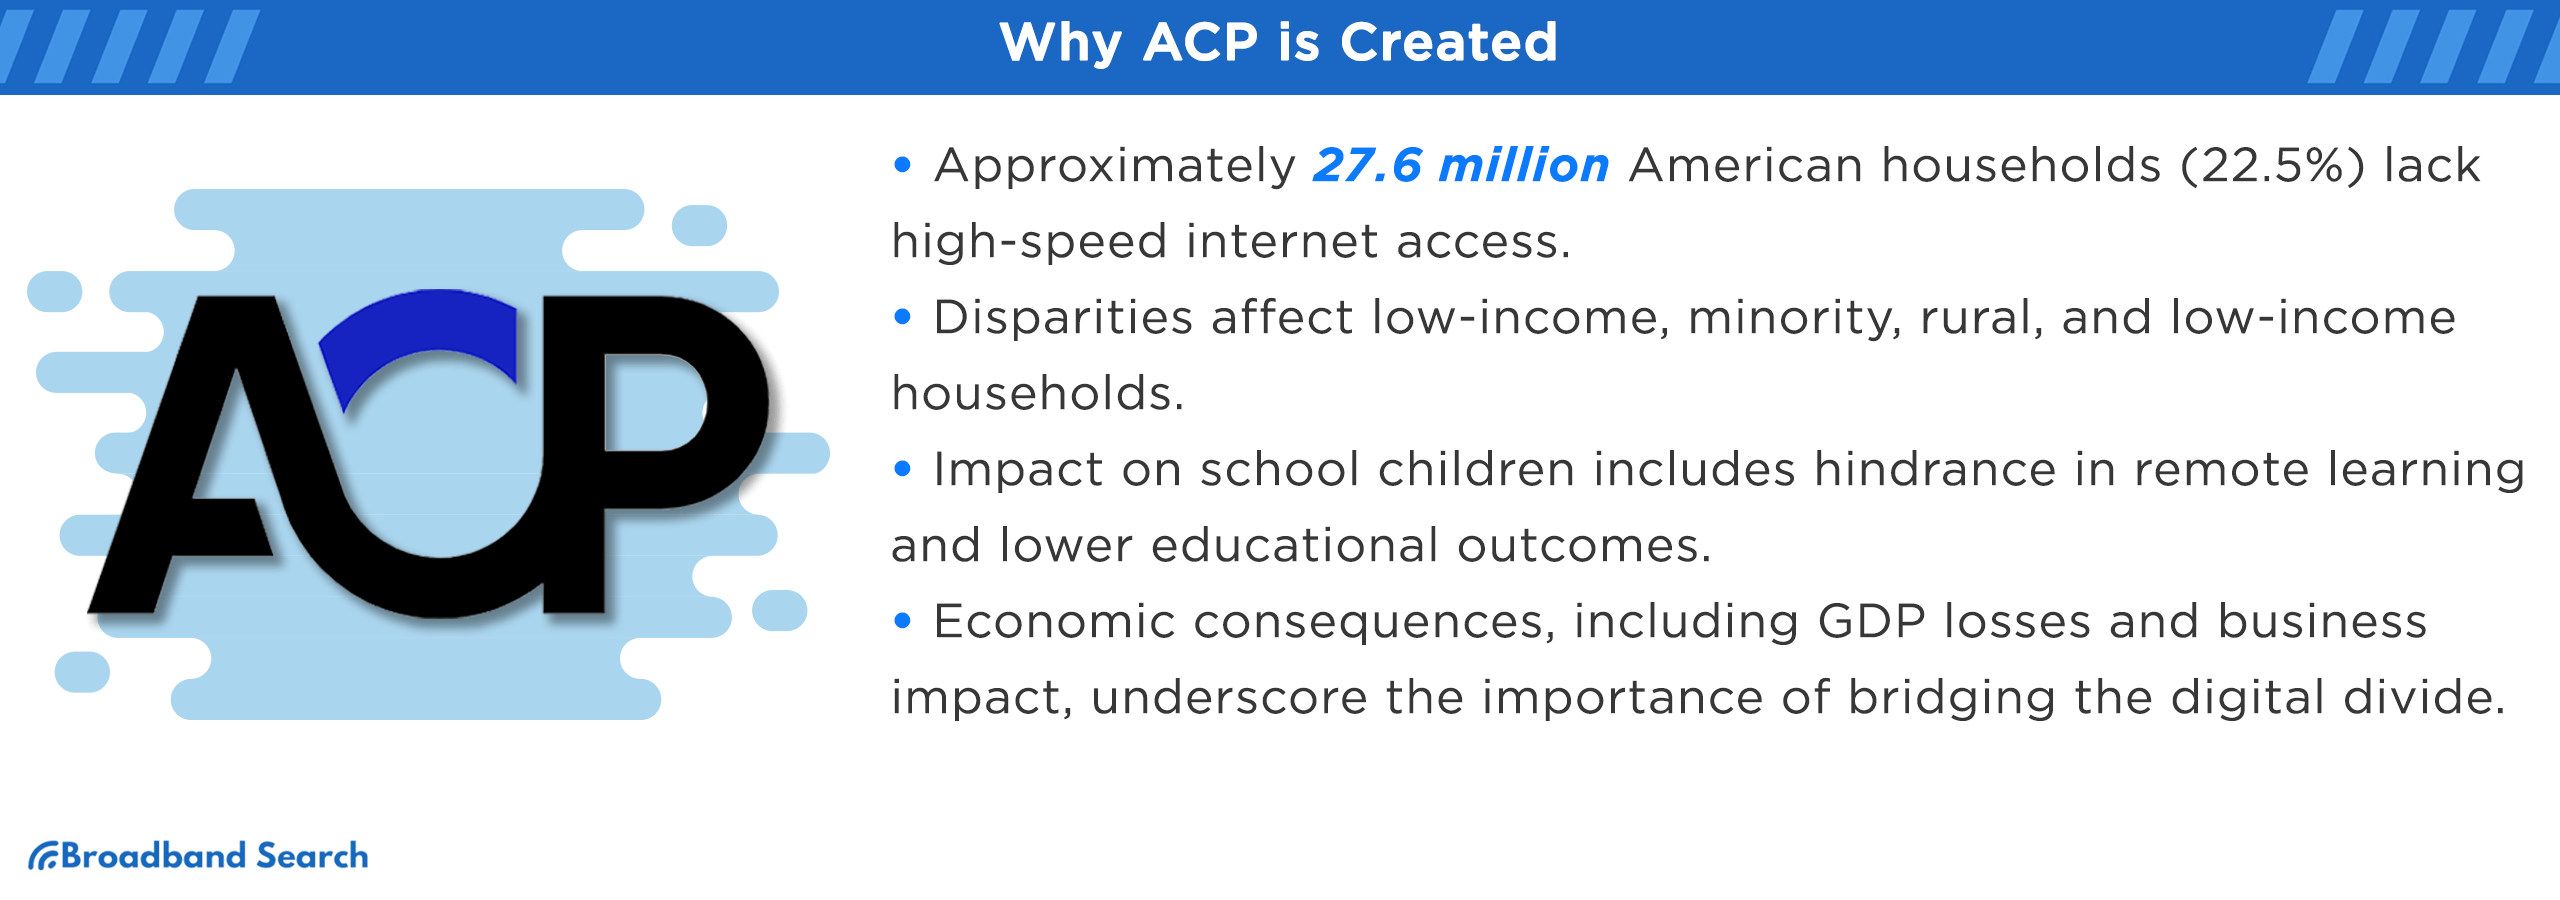 Reasons why the ACP was created